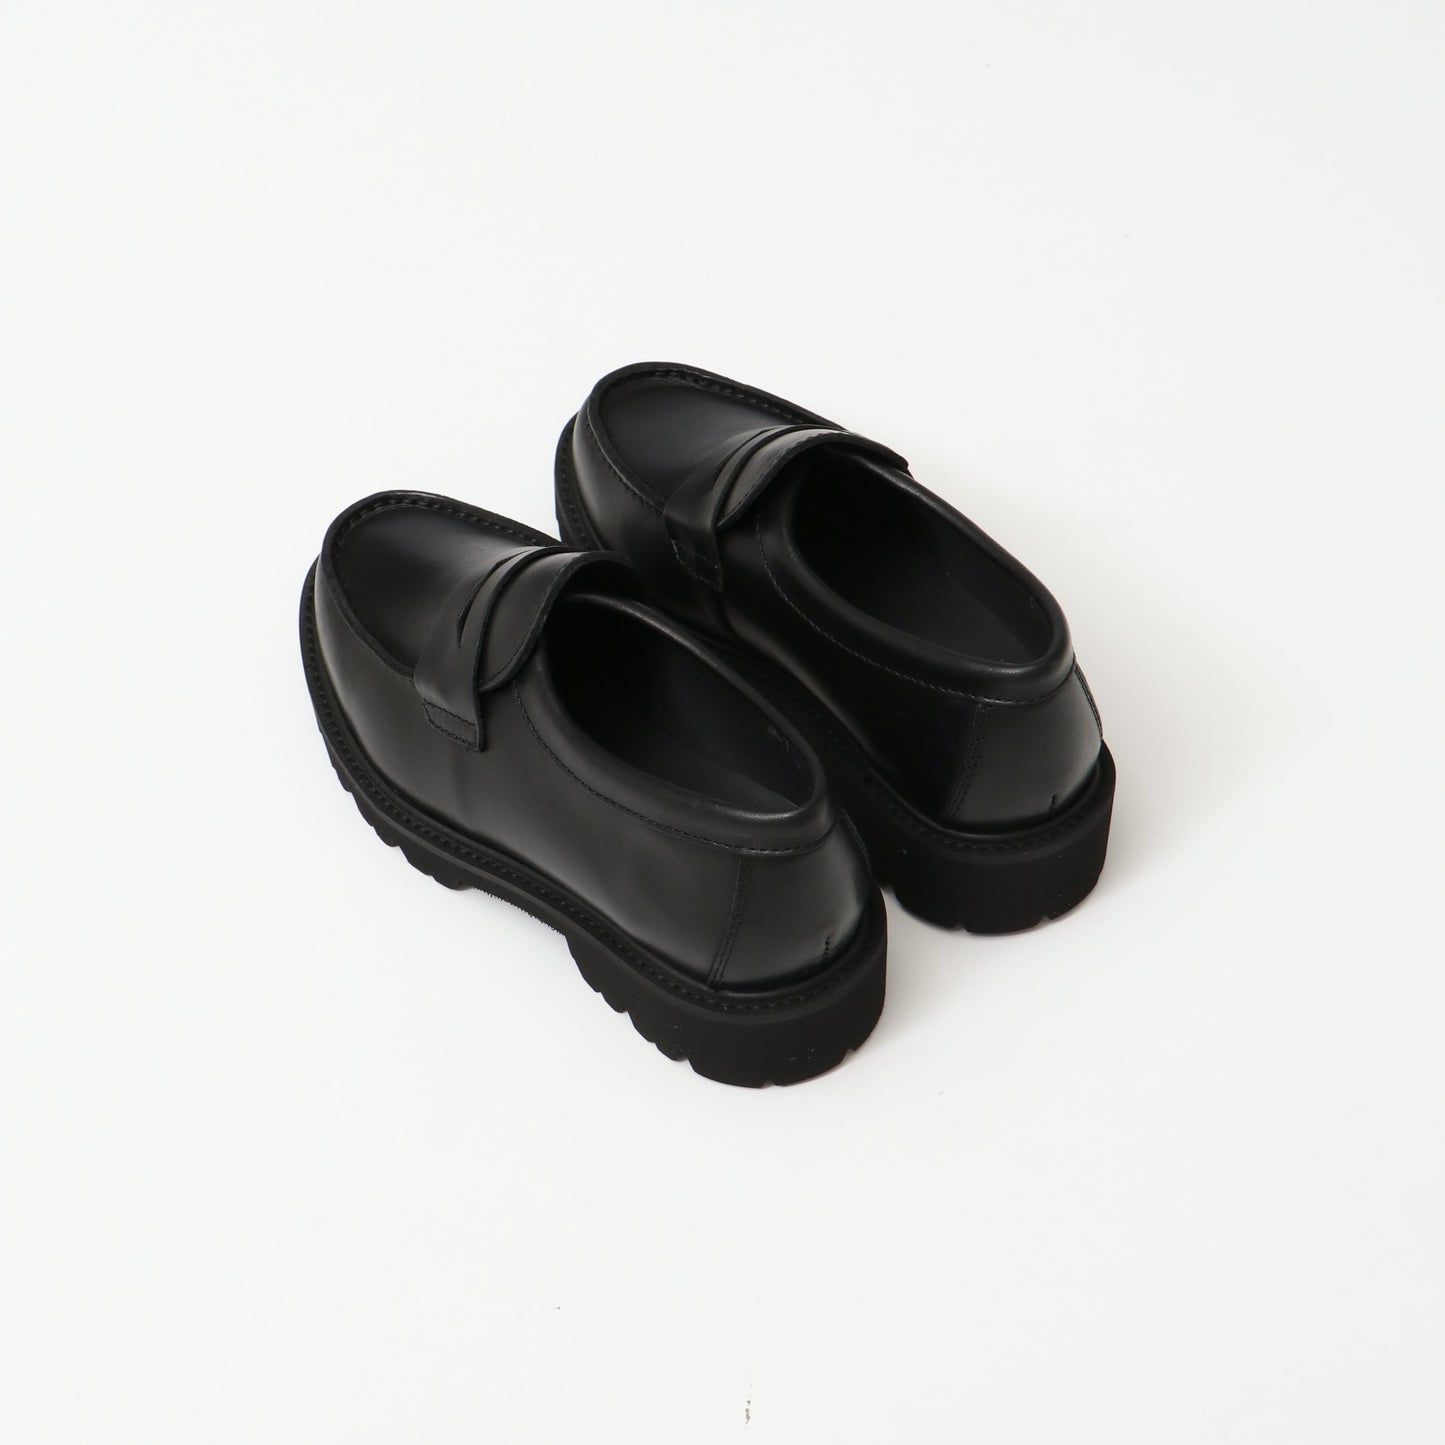 COIN LOAFERS